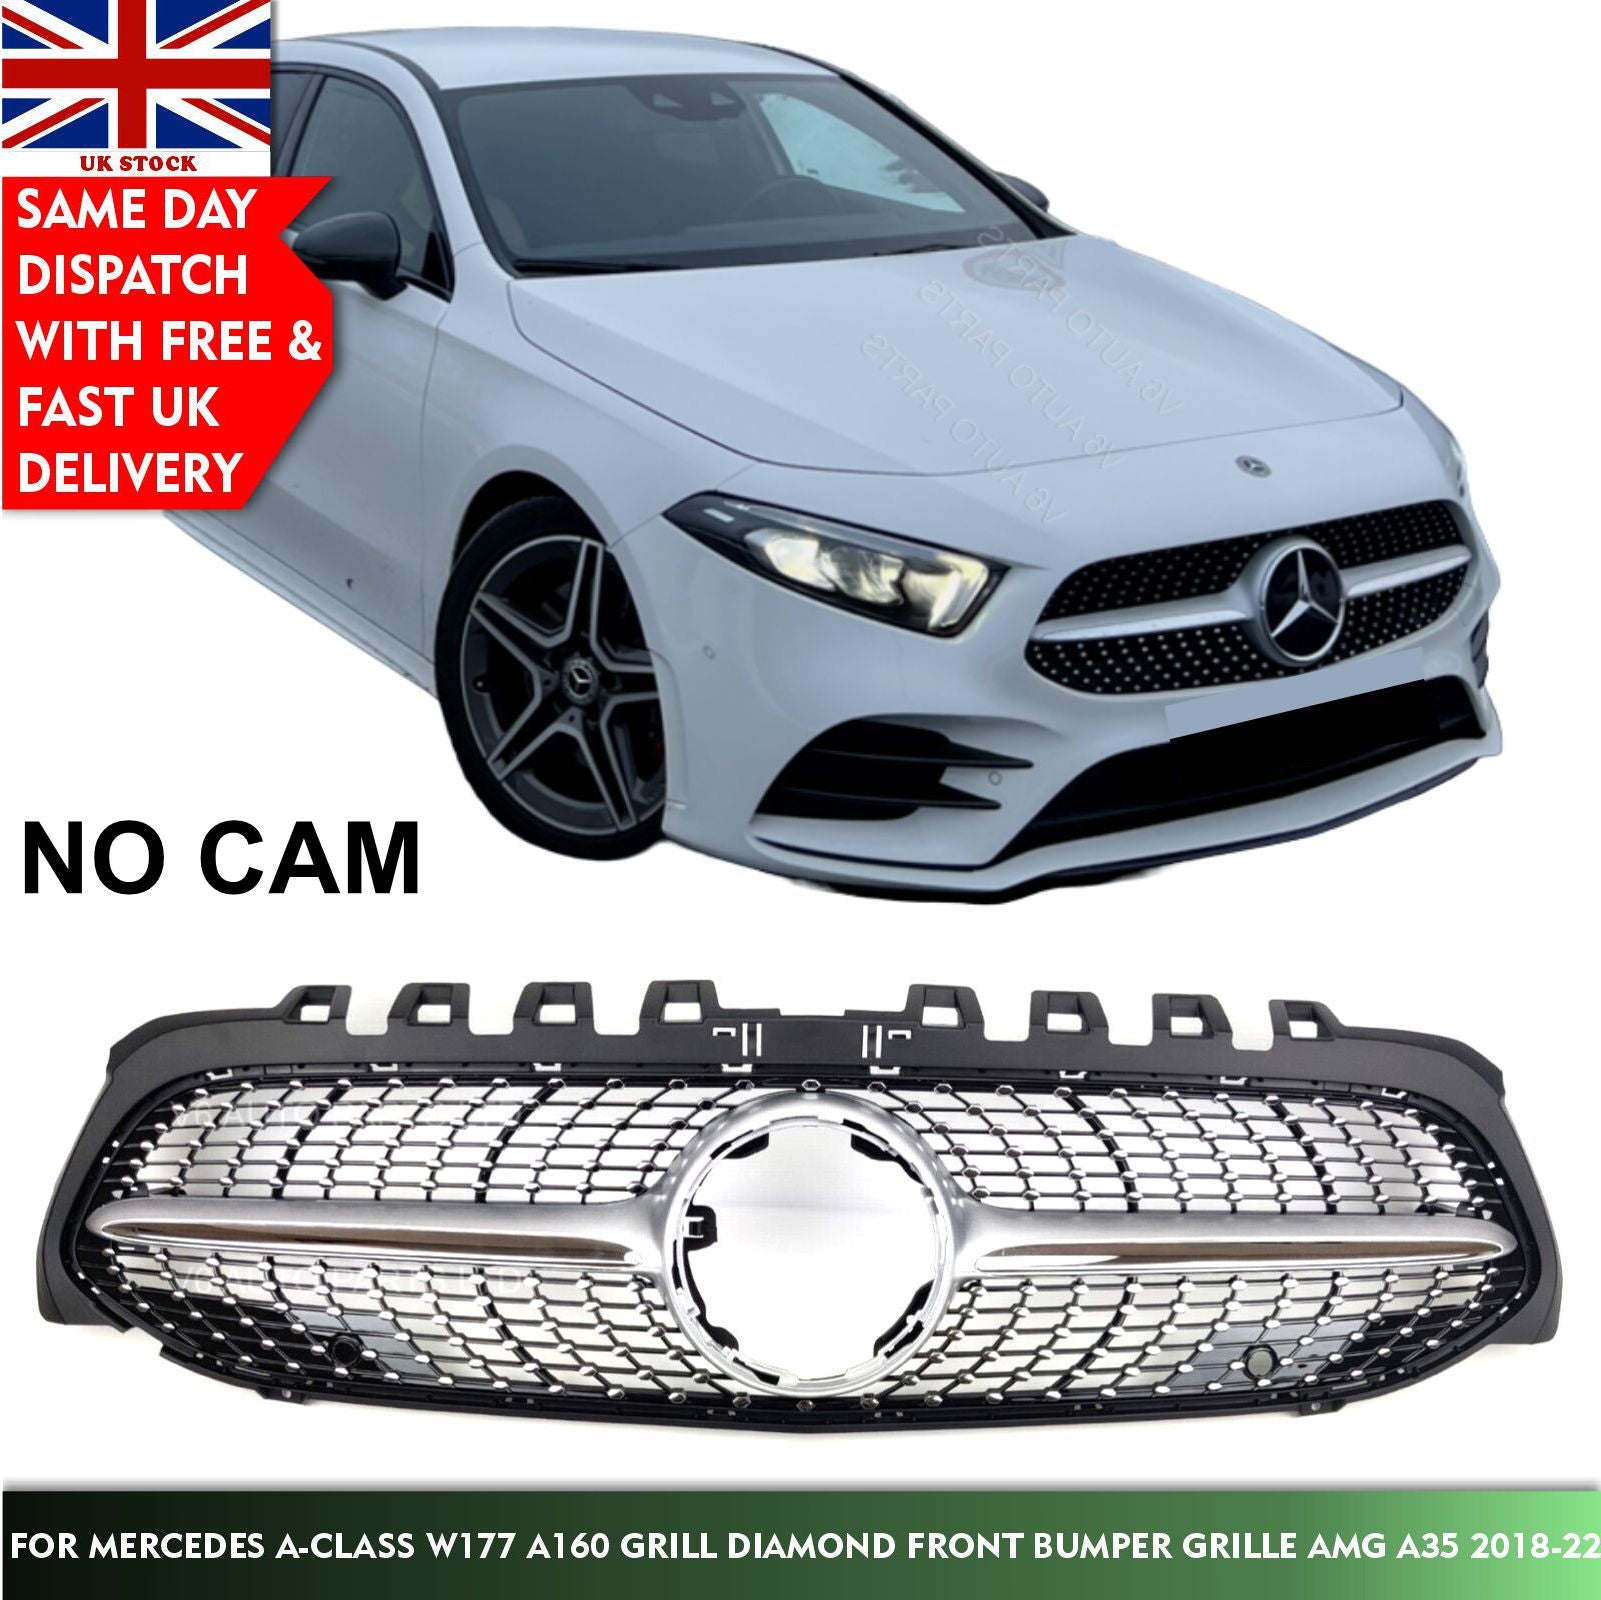 For Mercedes A-Class W177 A160 Grill Diamond Front 2018-22 Bumper Grille AMG A35